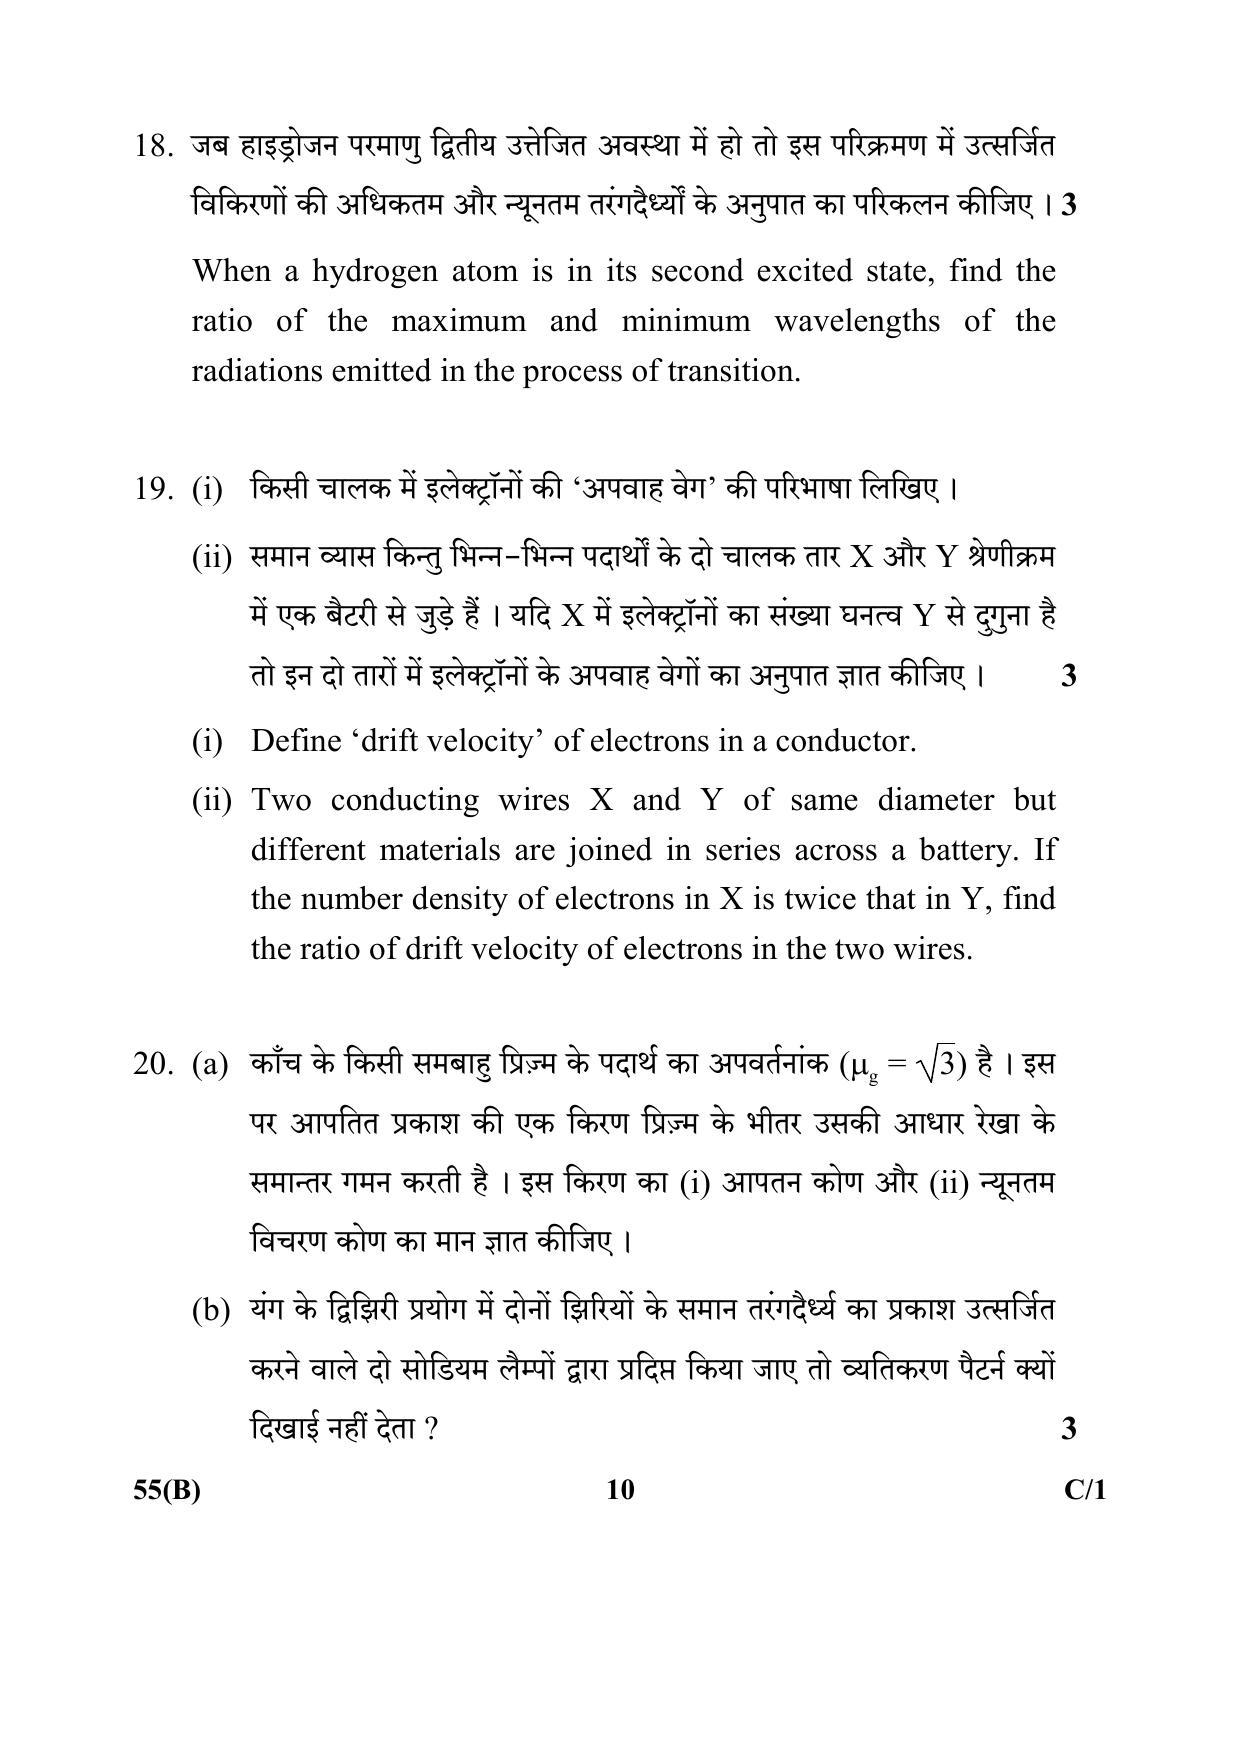 CBSE Class 12 55(B) (Physics) 2018 Compartment Question Paper - Page 10